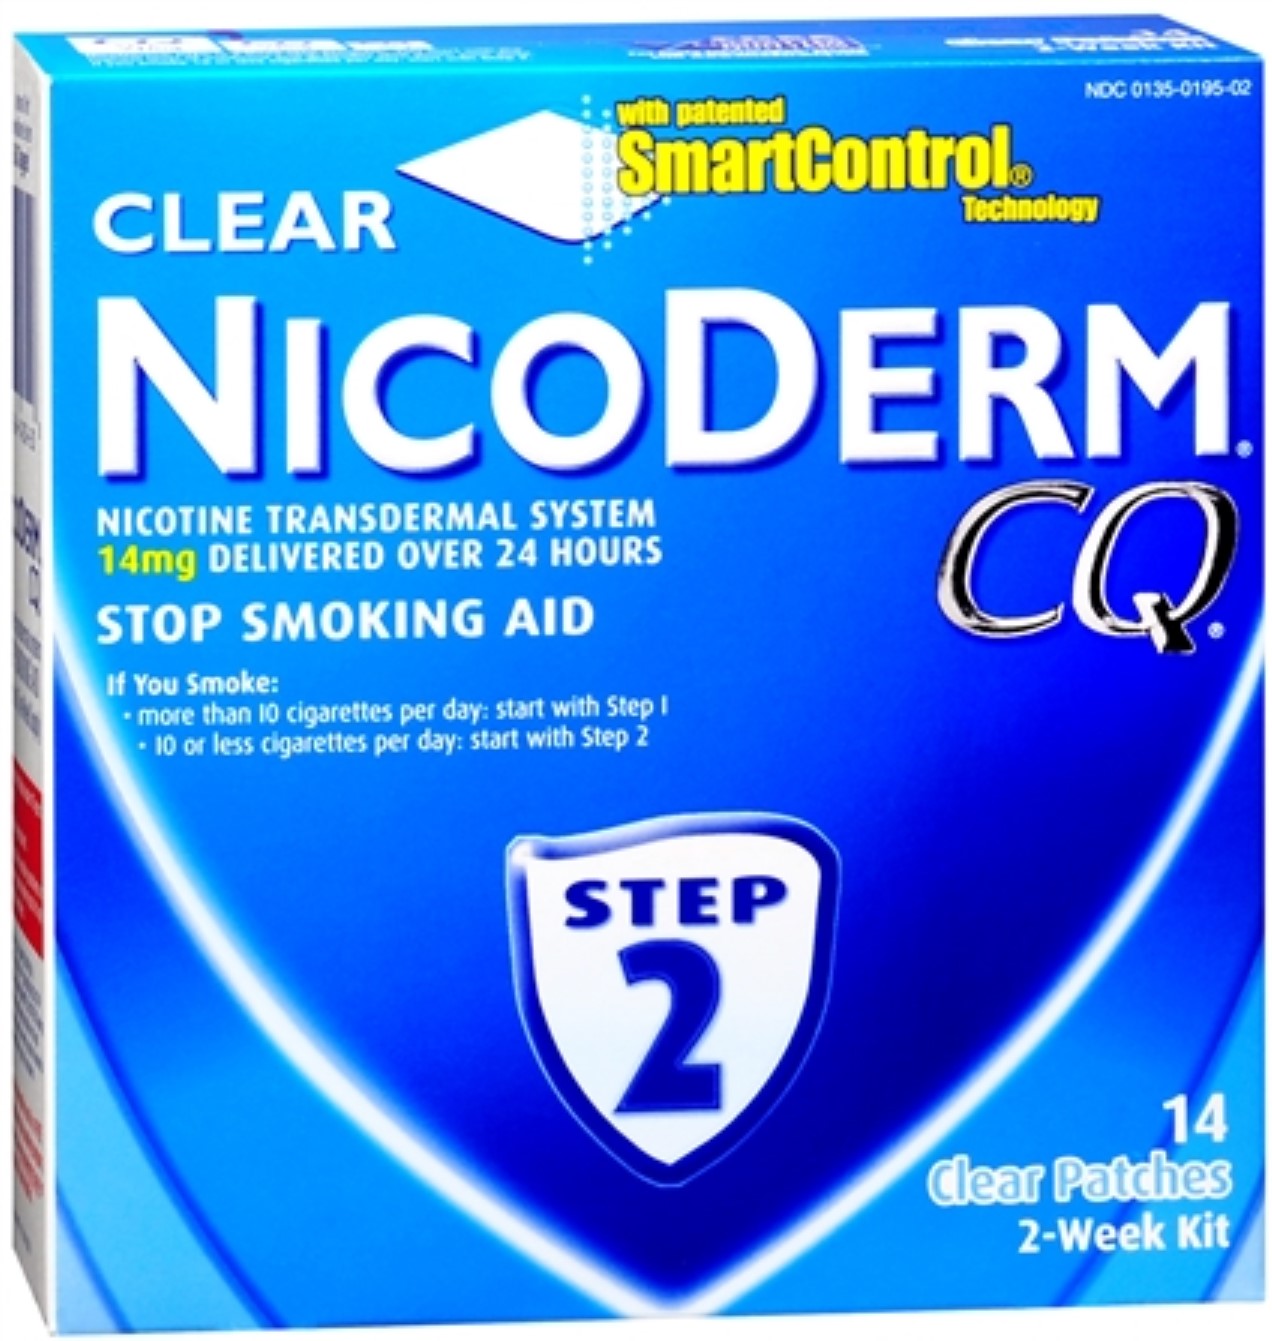 4 Pack - NicoDerm CQ Clear Patches Step 2 14 Each - image 1 of 1